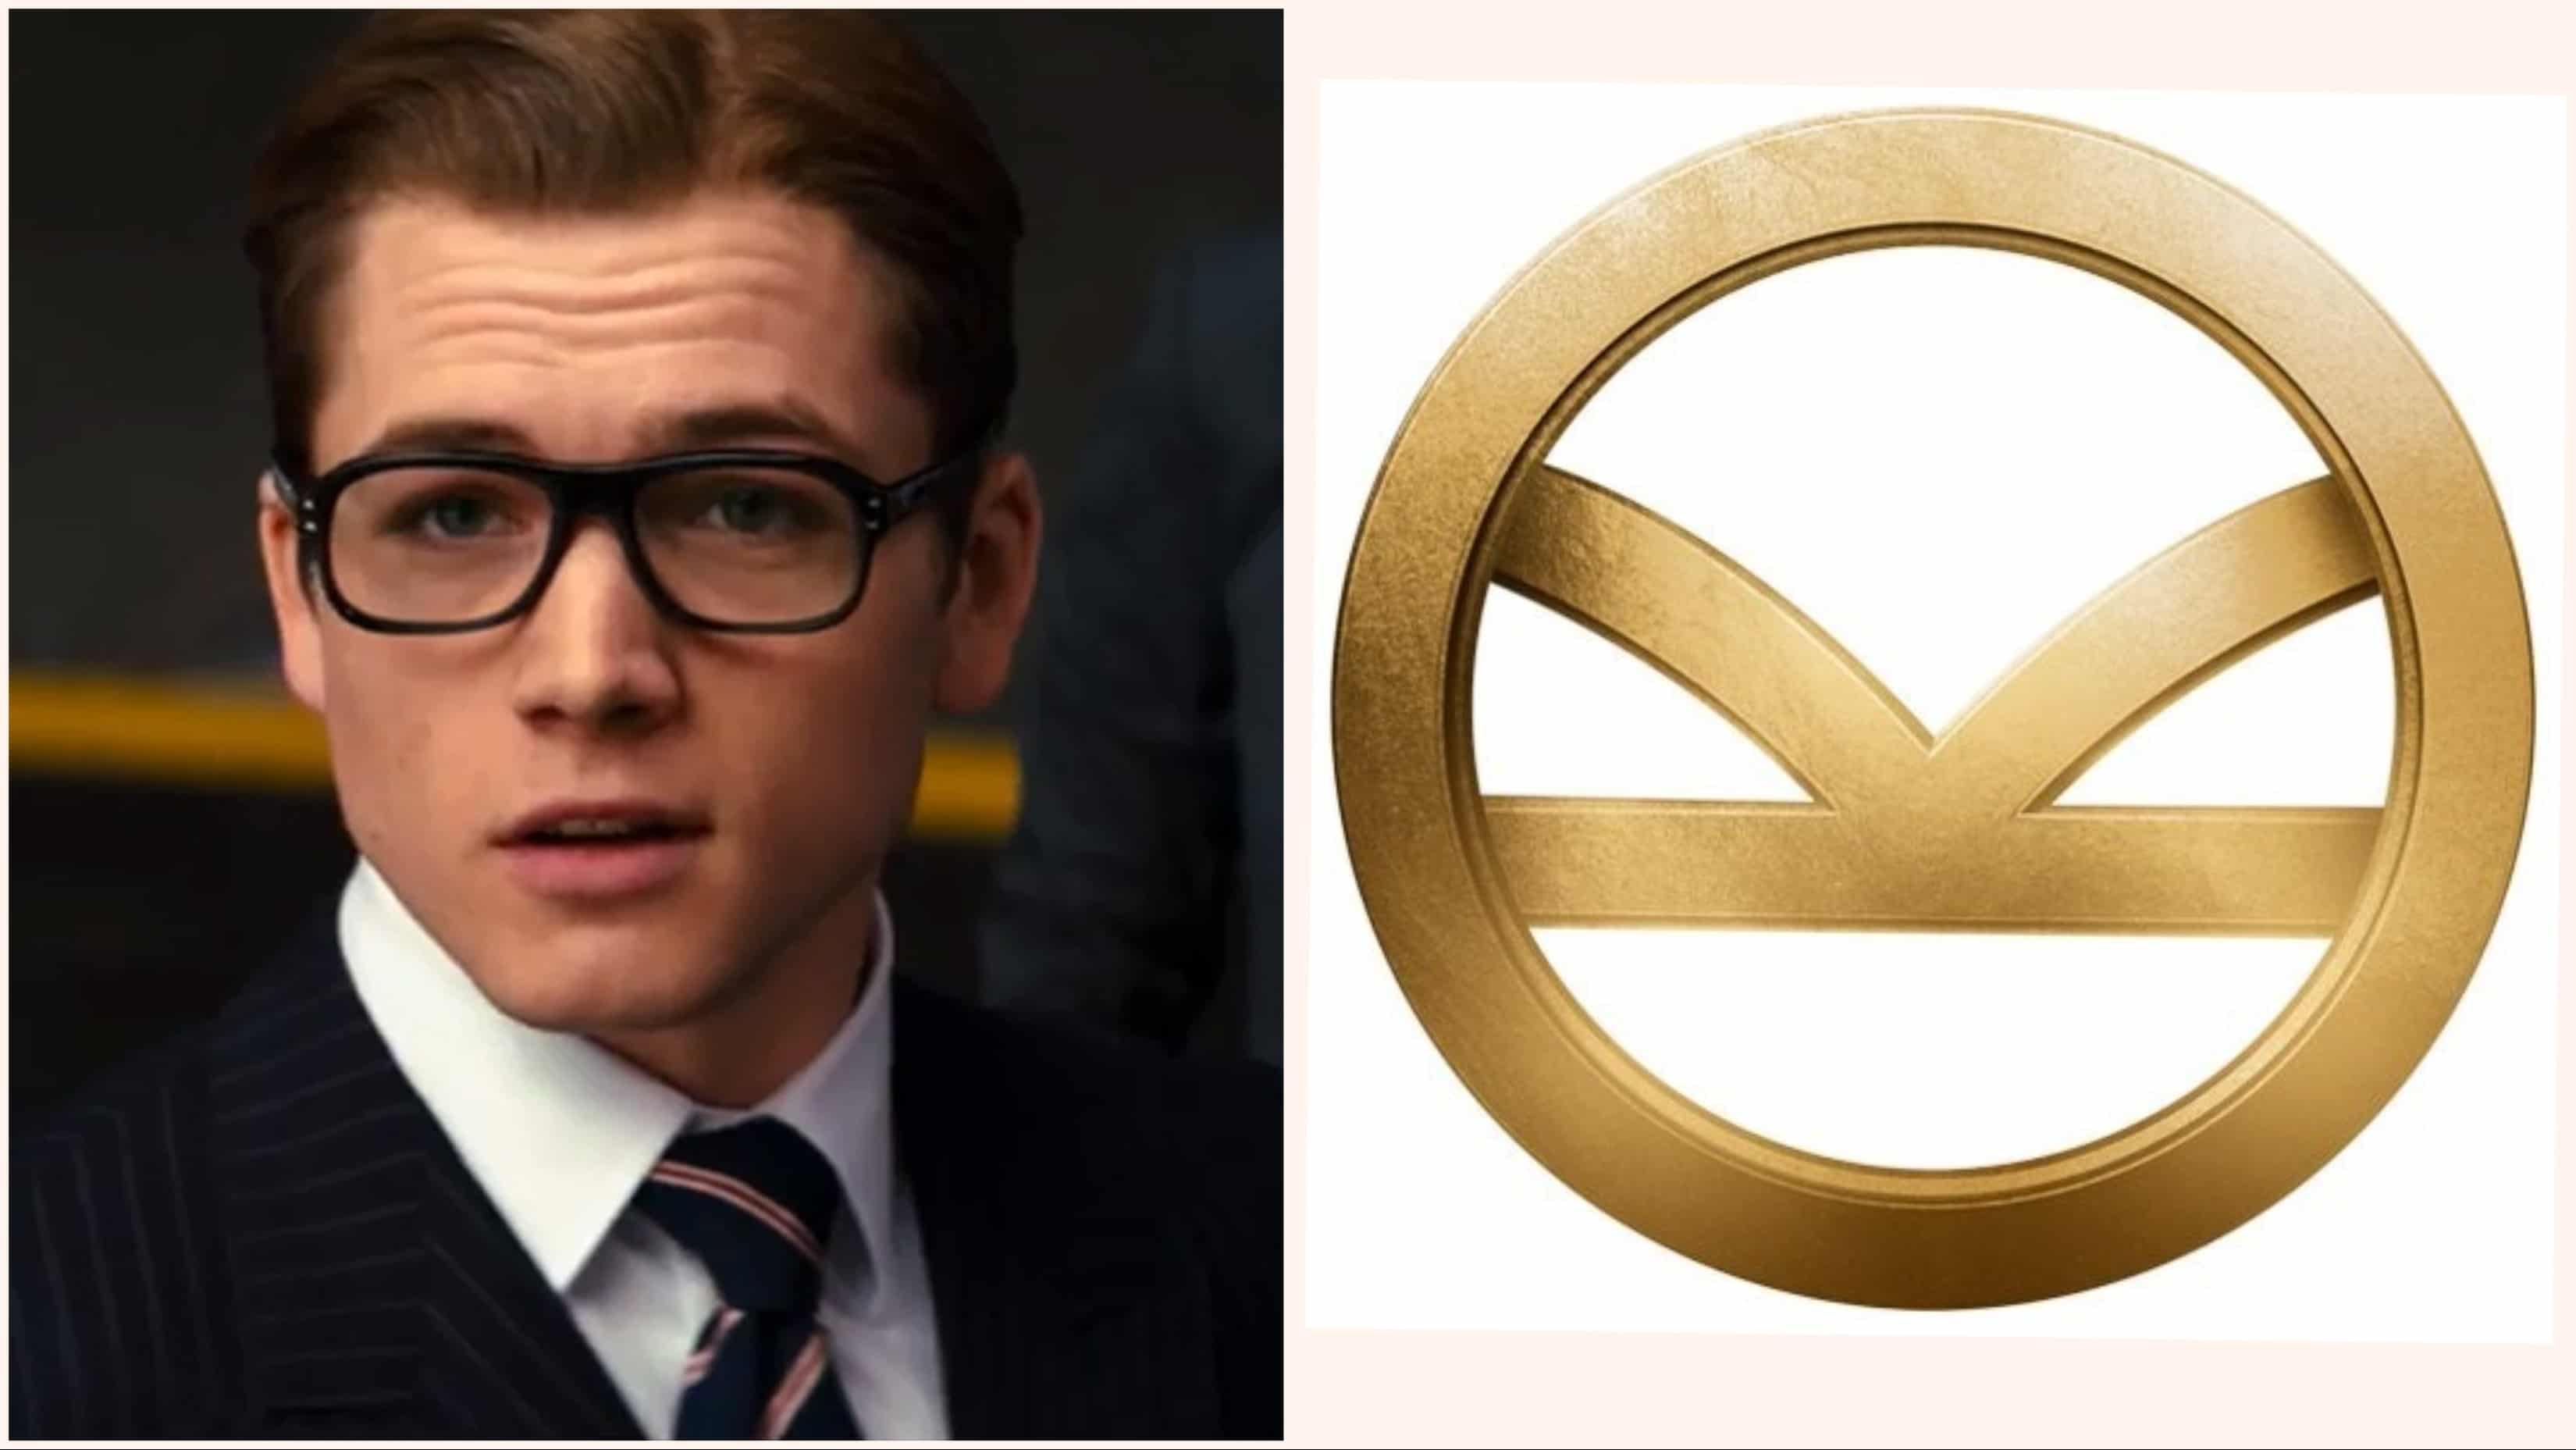 Taron Egerton recently spoke about his future in the Kingsman franchise and revealed that he won't be in the third film, but he's apparently not done yet.